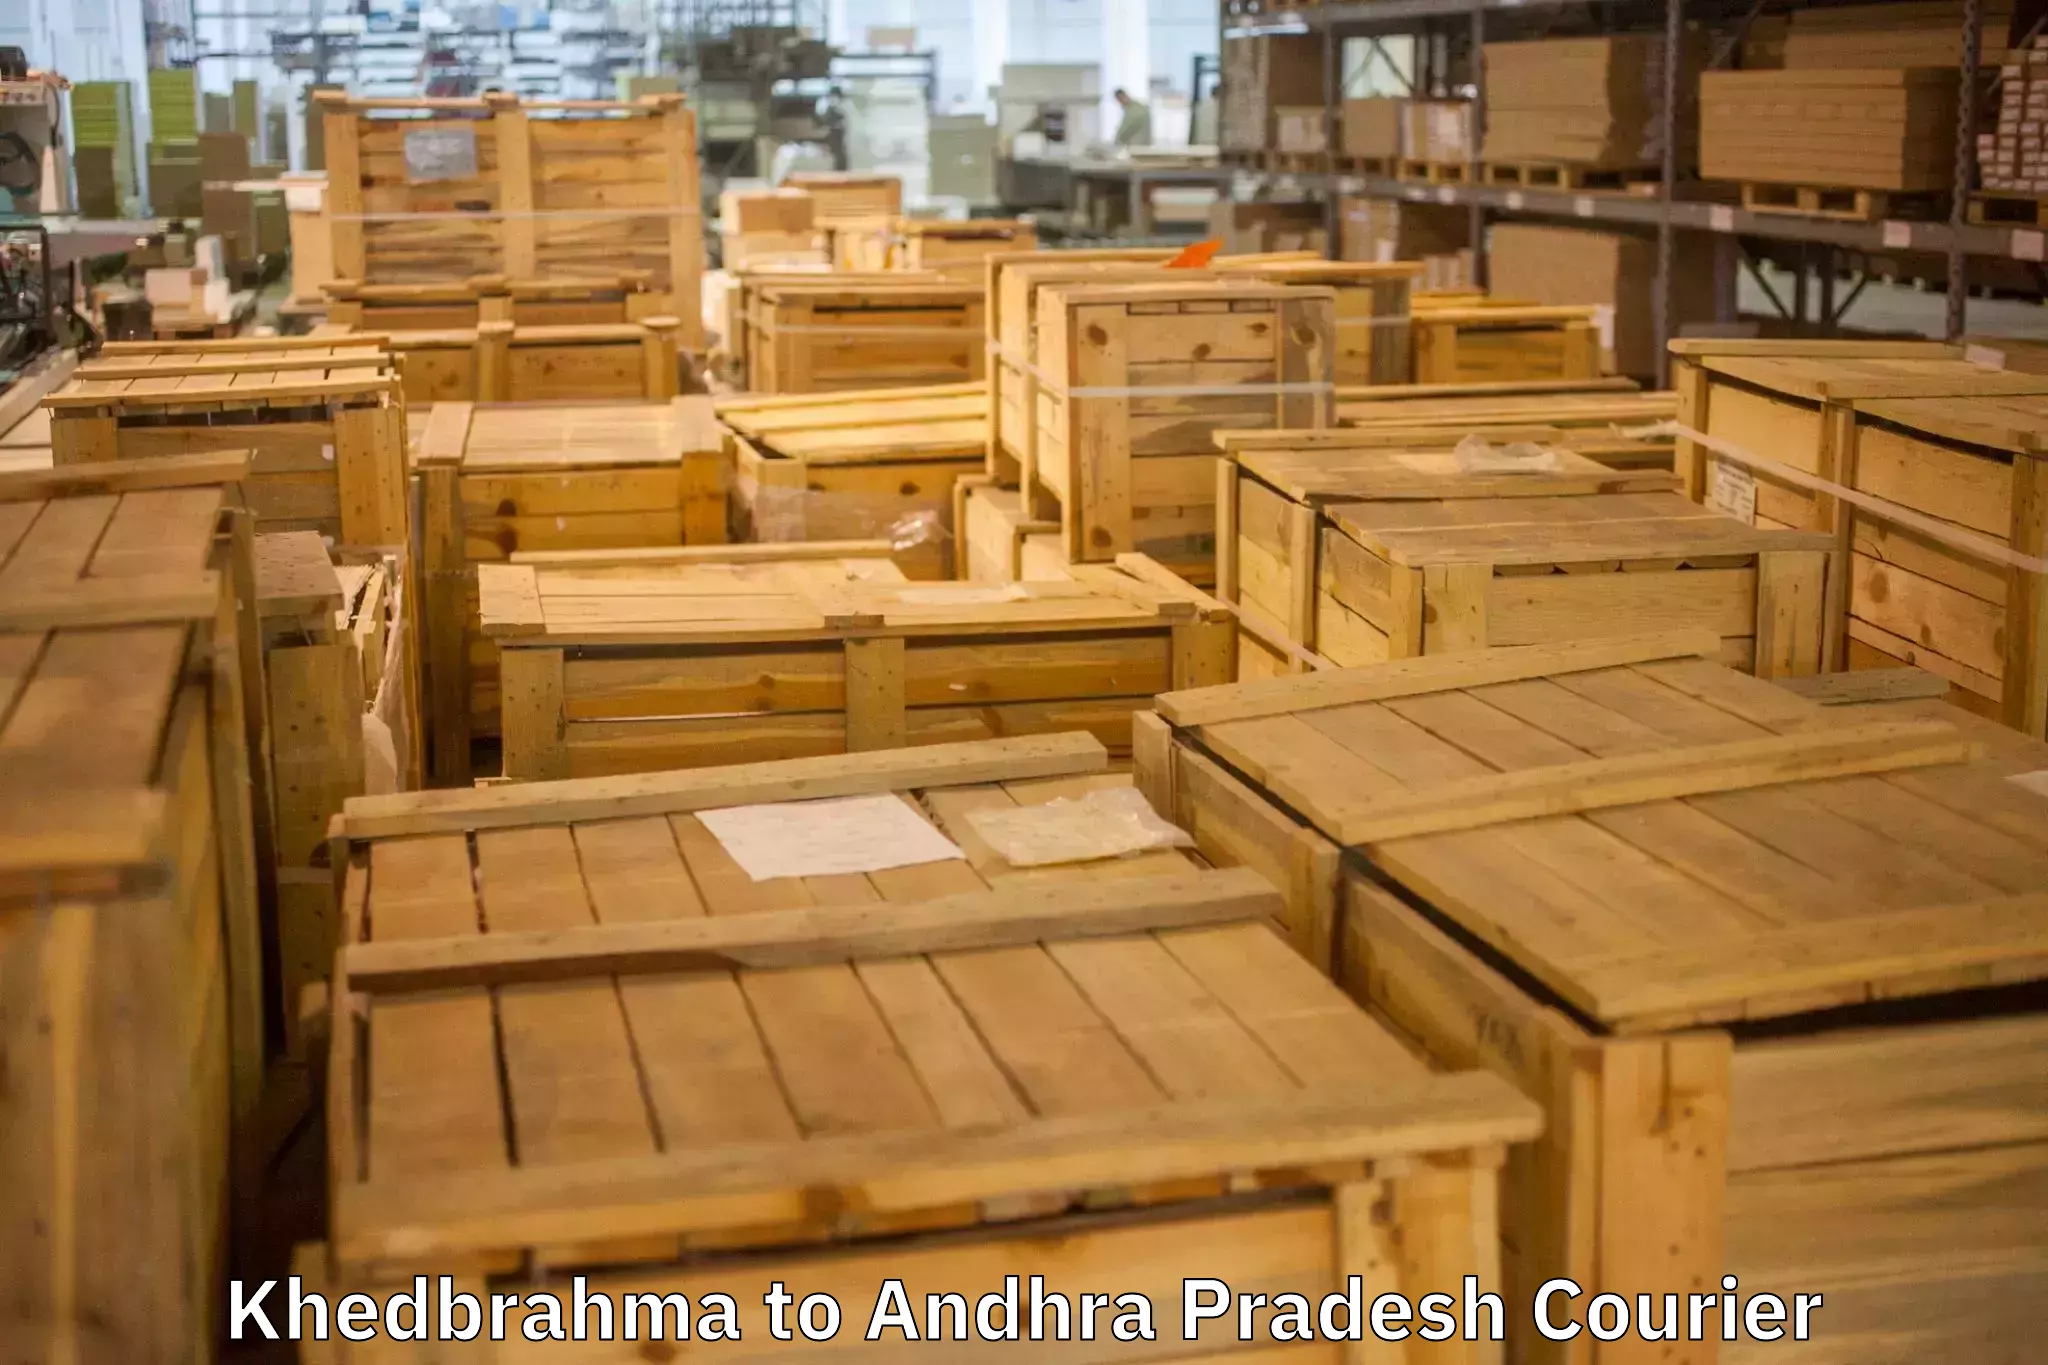 Professional moving assistance Khedbrahma to Anantapur